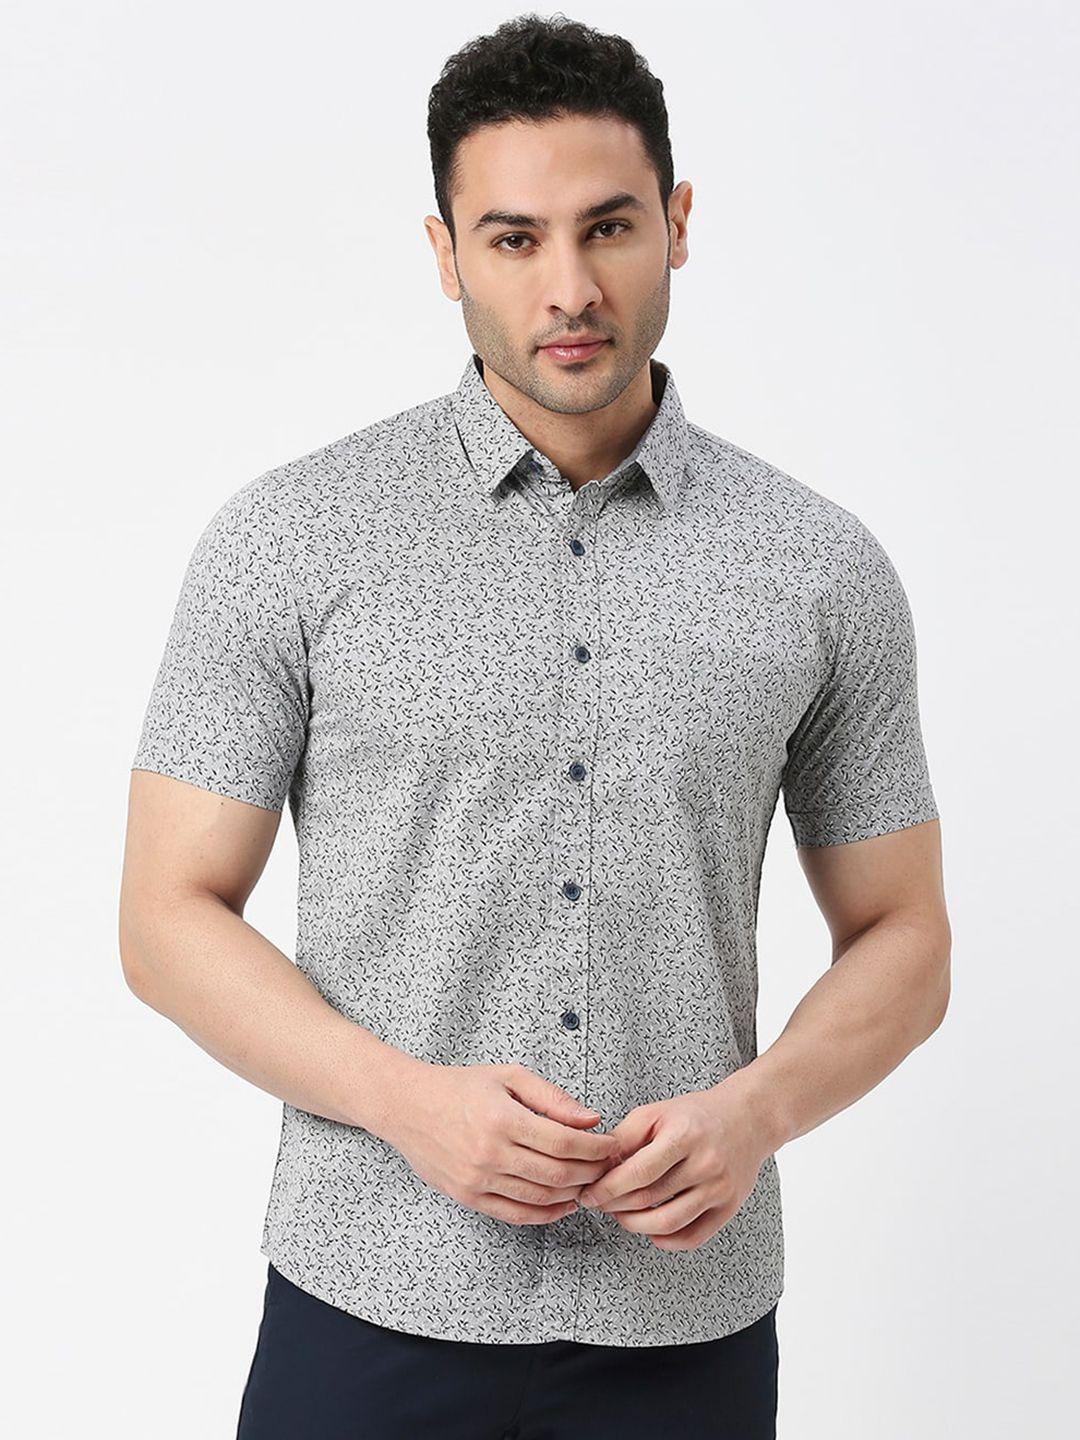 dragon hill slim fit micro & disty printed cotton casual shirt